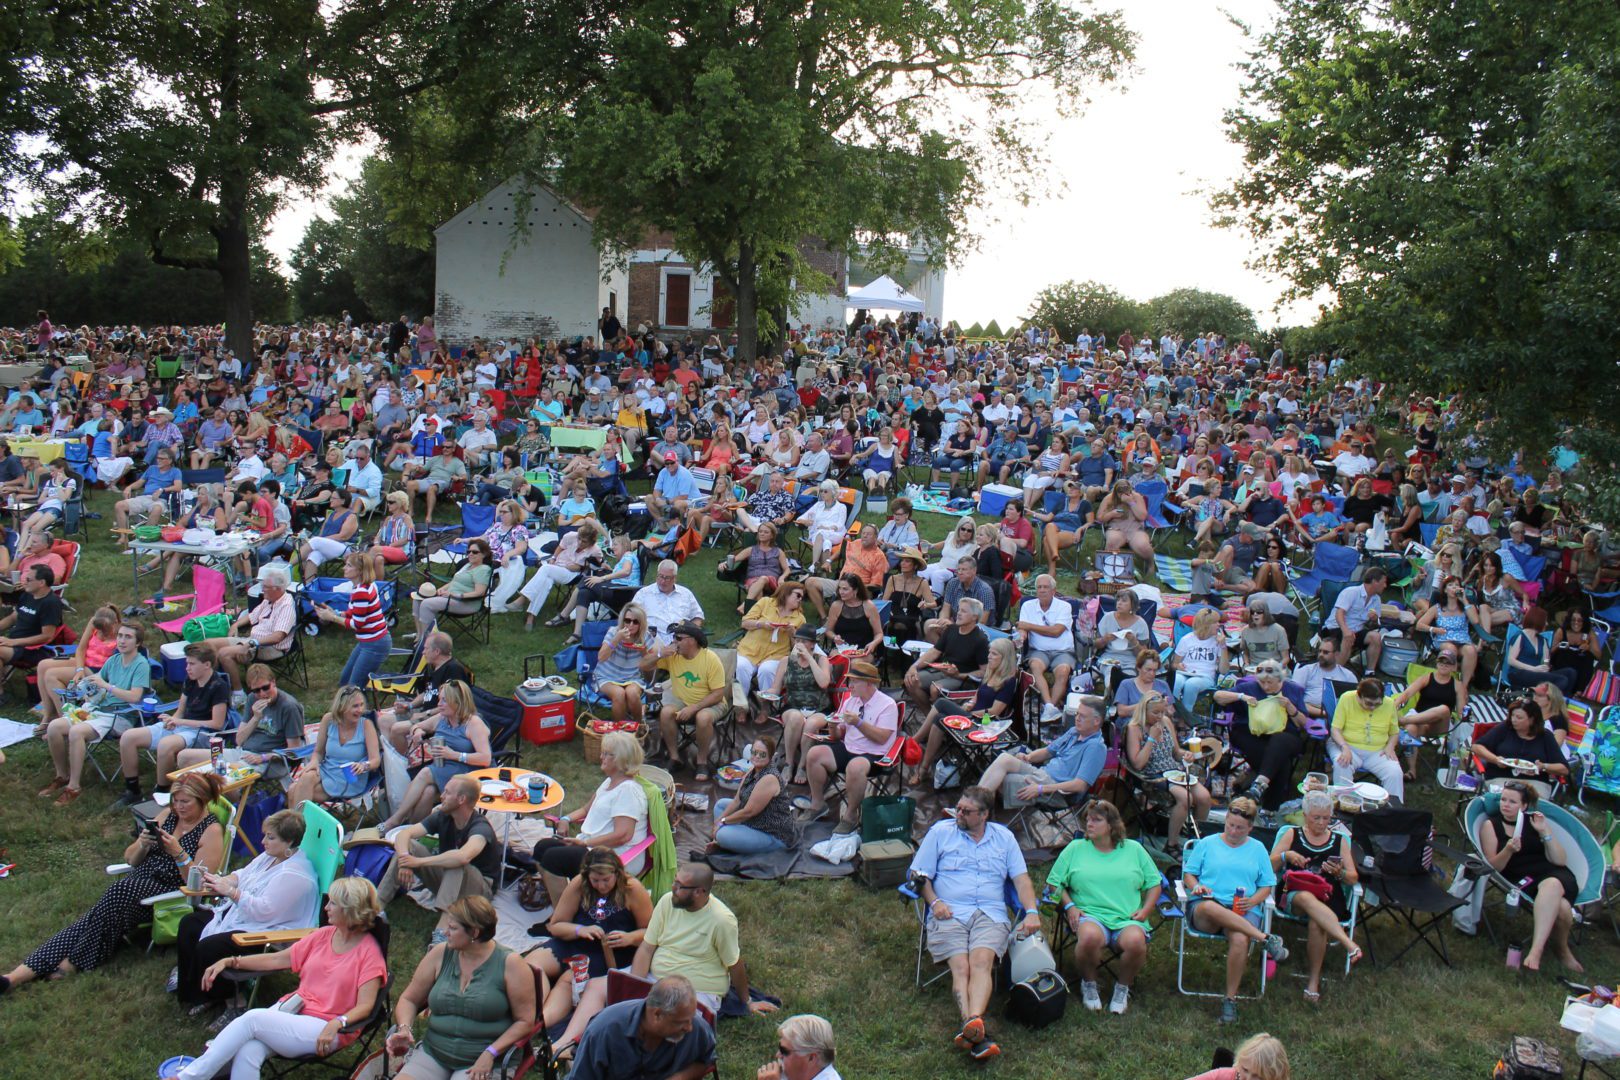 Carnton concert, Battle of Franklin Trust to host outdoor summer music concerts in Franklin, TN.